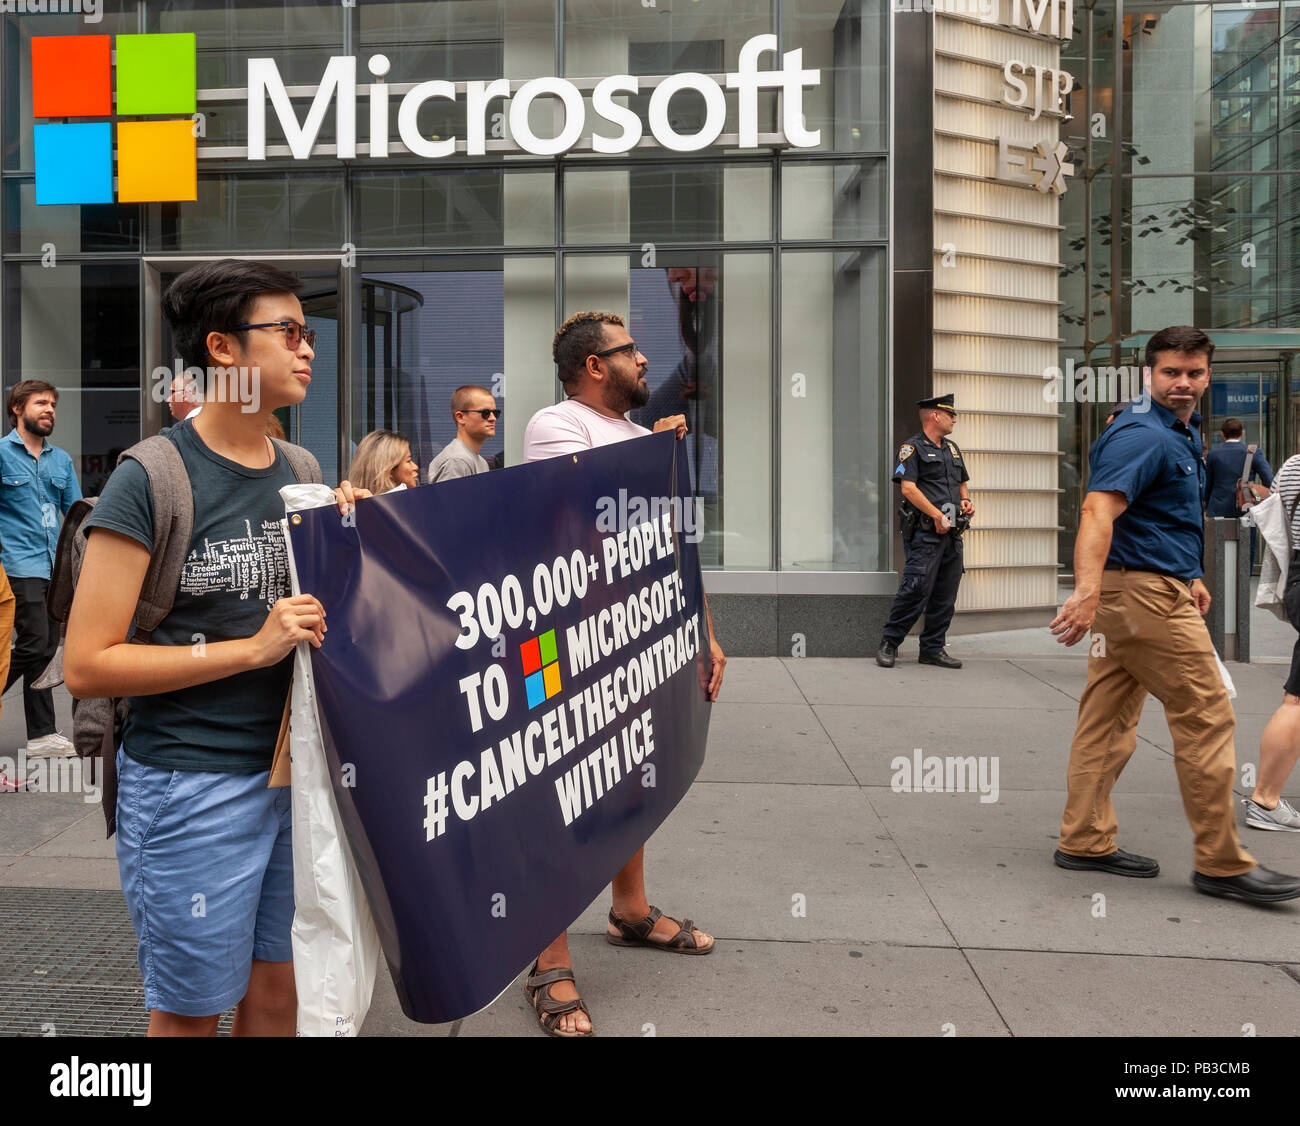 New York, USA. 26th July 2018. Activists gather in front of Microsoft's New York offices on Thursday, July 26, 2018  to protest the tech company supplying technology to Immigration and Customs Enforcement (ICE).Over 300,000 have signed petitions calling on Microsoft to cancel their contract with ICE because of ICE's activities separating immigrant parents from their children. Similar protests are taking place at other Microsoft offices around the country. (© Richard B. Levine) Credit: Richard Levine/Alamy Live News Stock Photo